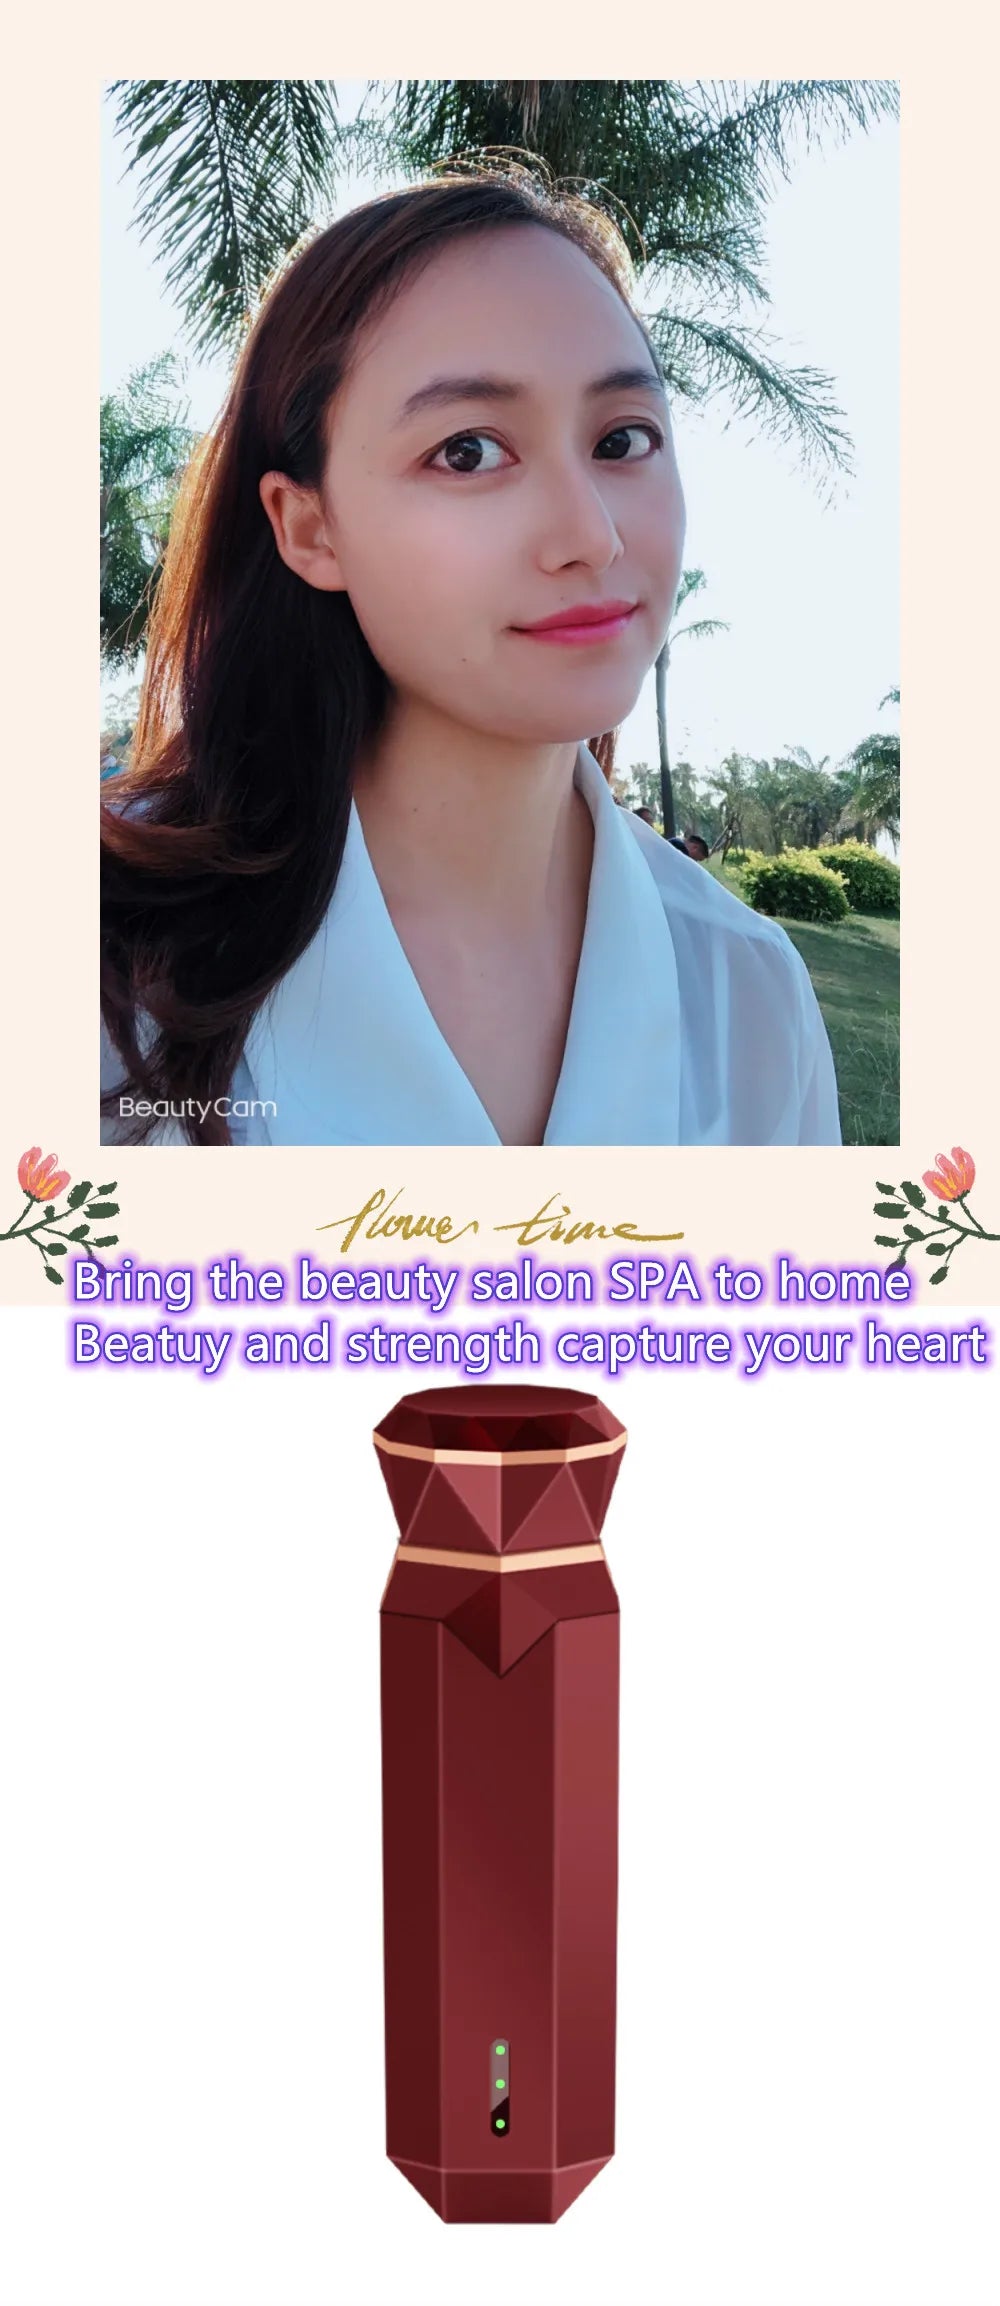 "Revitalize and Rejuvenate Your Skin with Our All-In-One Rechargeable Beauty Device - Experience the Power of Ultrasonic Skin Rejuvenation, Anti-Aging Care, EMS RF, and LED Mesotherapy for Flawless Face Care"